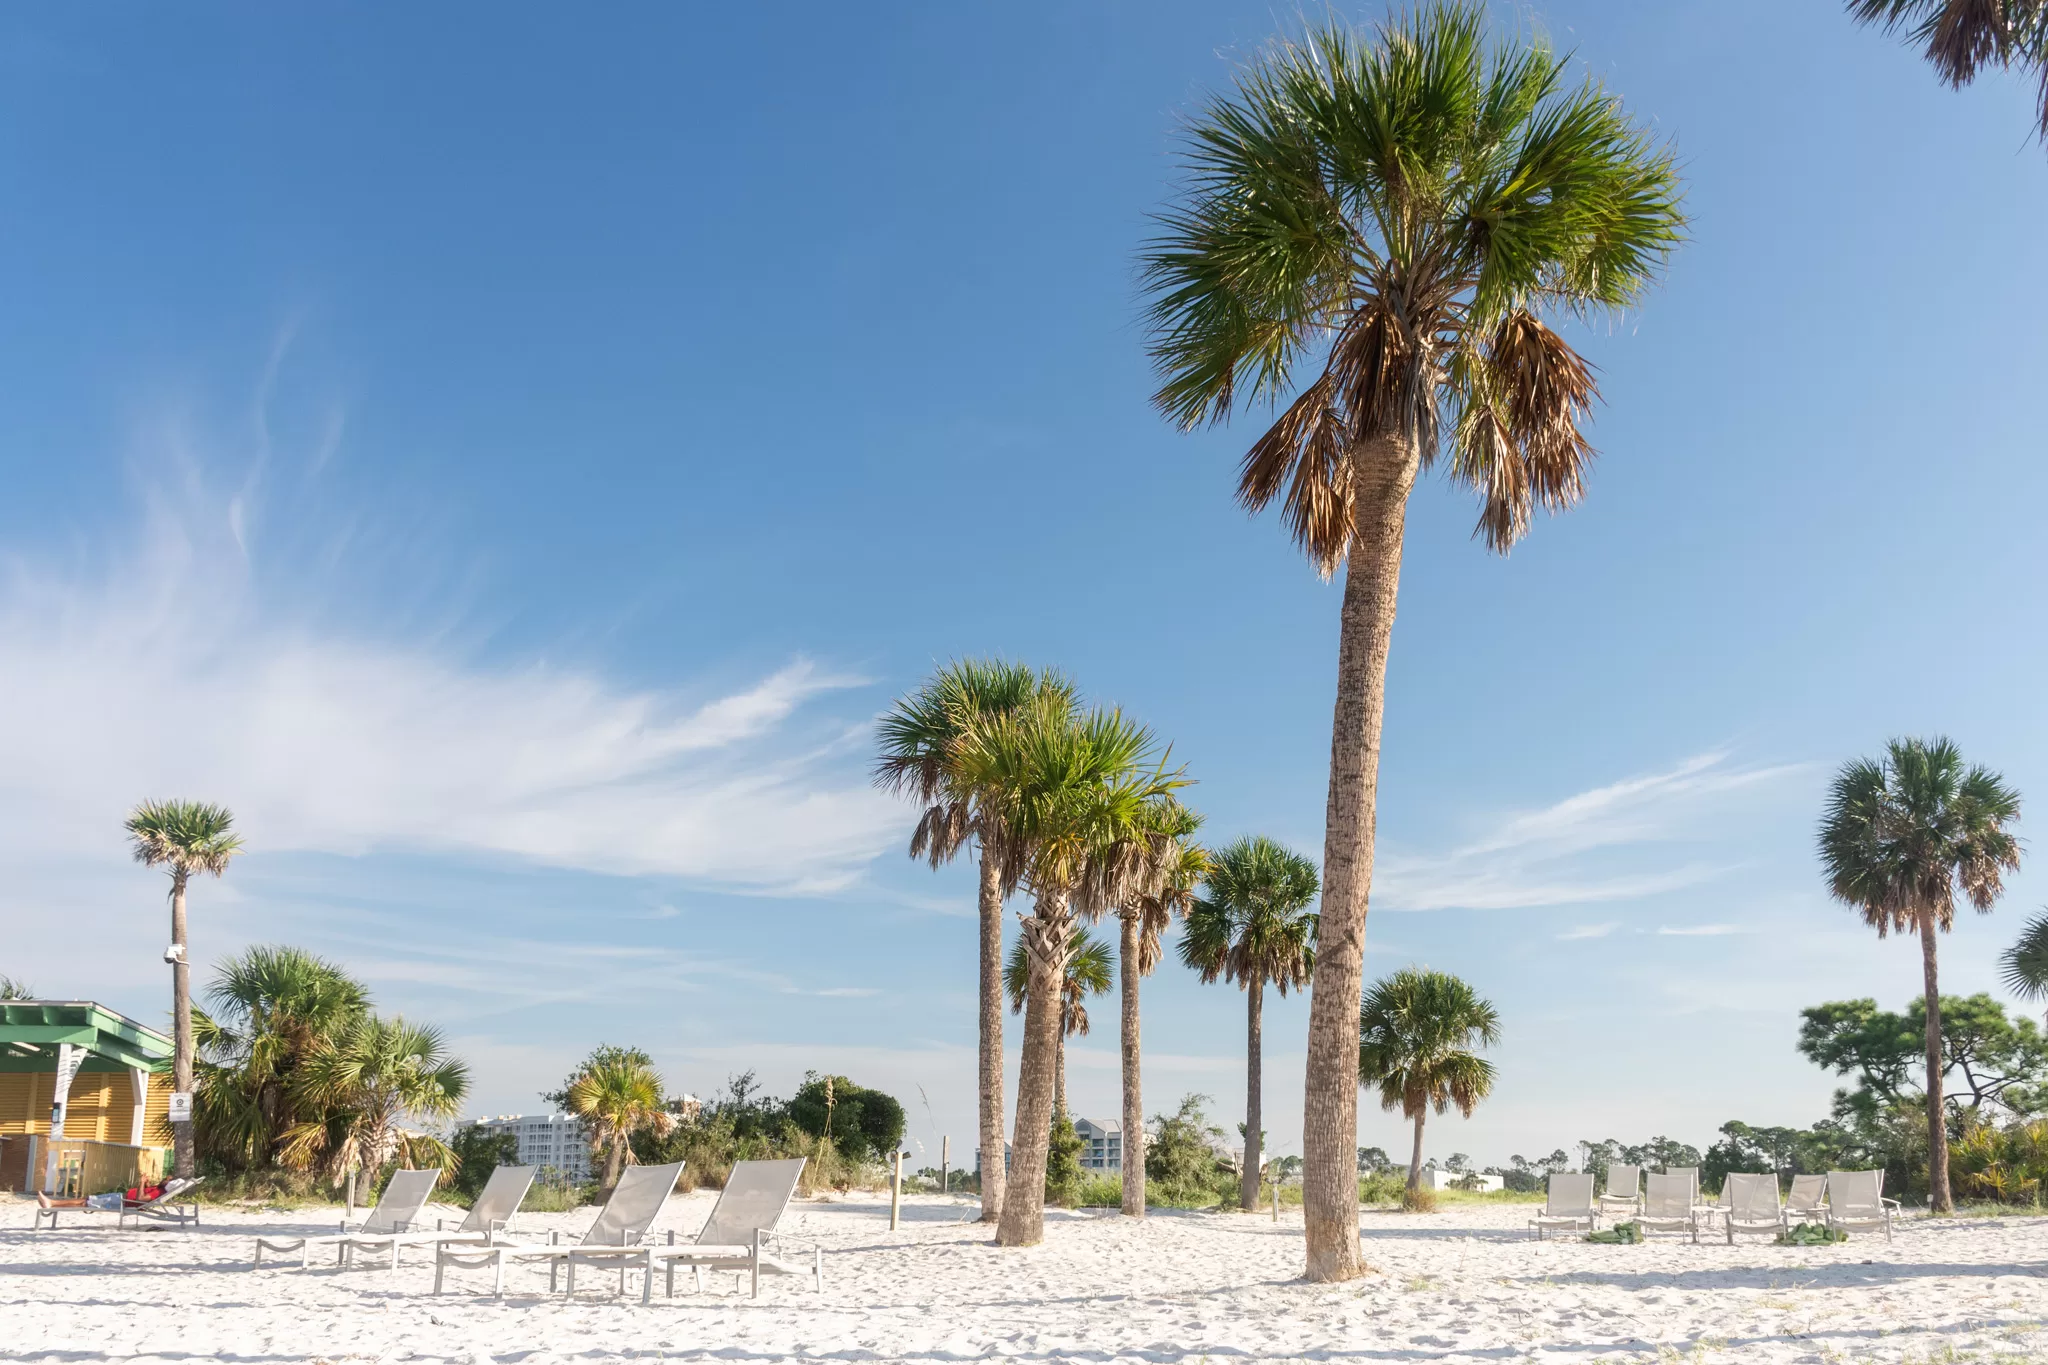 Image of Palm trees and white sand in Panama City Beach FLorida